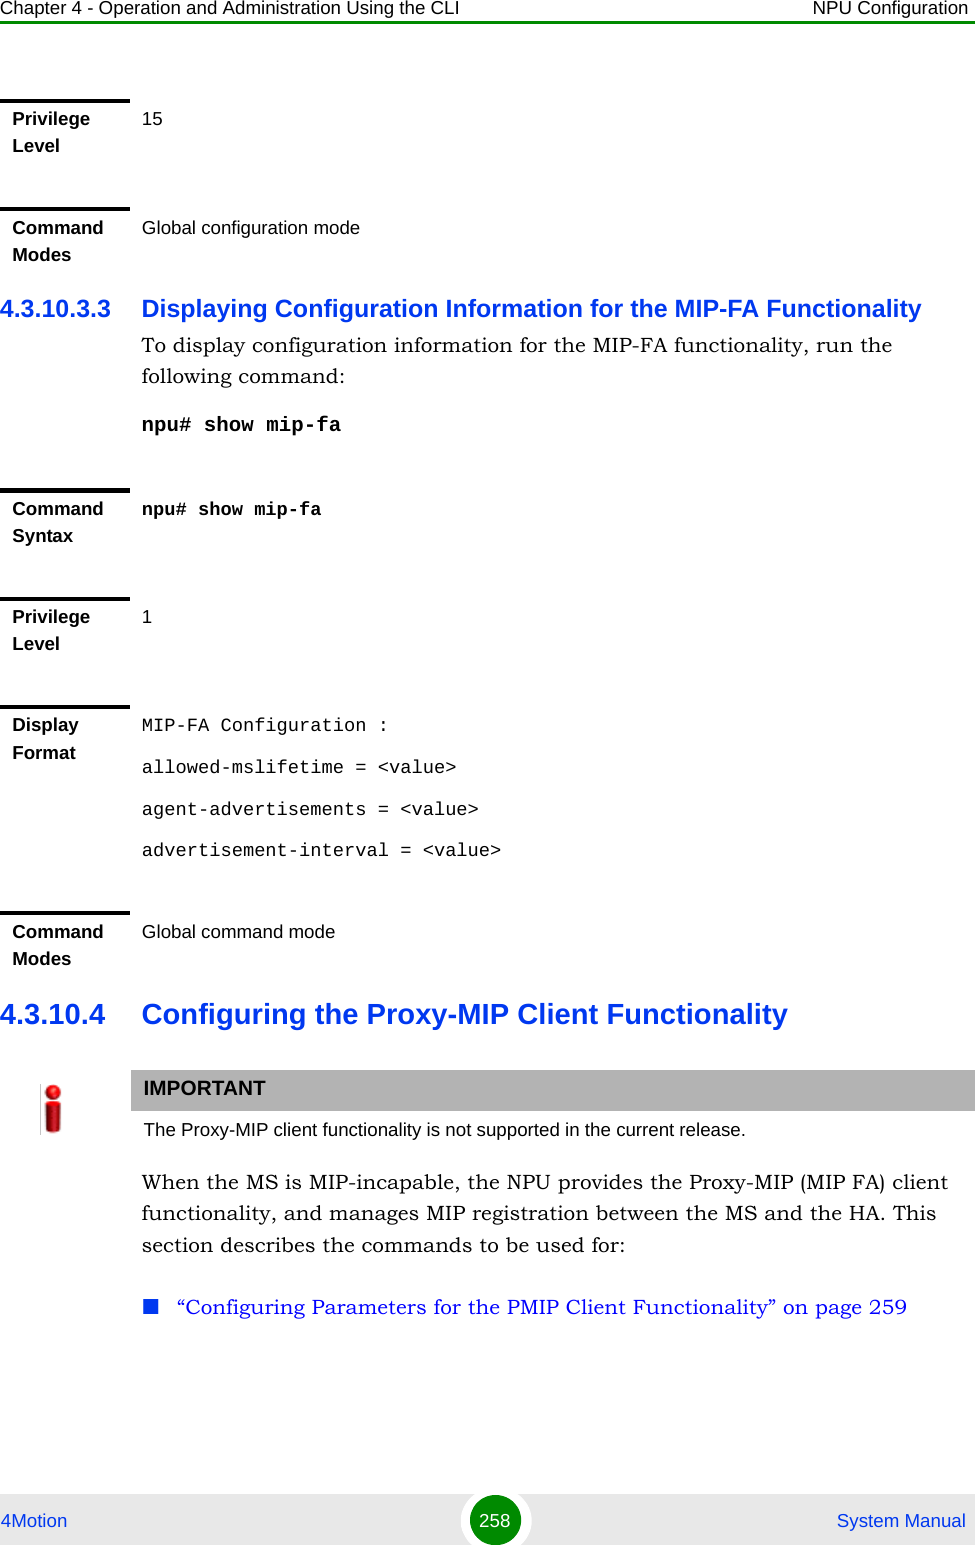 Chapter 4 - Operation and Administration Using the CLI NPU Configuration4Motion 258  System Manual4.3.10.3.3 Displaying Configuration Information for the MIP-FA FunctionalityTo display configuration information for the MIP-FA functionality, run the following command:npu# show mip-fa4.3.10.4 Configuring the Proxy-MIP Client FunctionalityWhen the MS is MIP-incapable, the NPU provides the Proxy-MIP (MIP FA) client functionality, and manages MIP registration between the MS and the HA. This section describes the commands to be used for: “Configuring Parameters for the PMIP Client Functionality” on page 259Privilege Level15Command ModesGlobal configuration modeCommand Syntaxnpu# show mip-faPrivilege Level1Display FormatMIP-FA Configuration :allowed-mslifetime = &lt;value&gt;agent-advertisements = &lt;value&gt;advertisement-interval = &lt;value&gt;Command ModesGlobal command modeIMPORTANTThe Proxy-MIP client functionality is not supported in the current release.